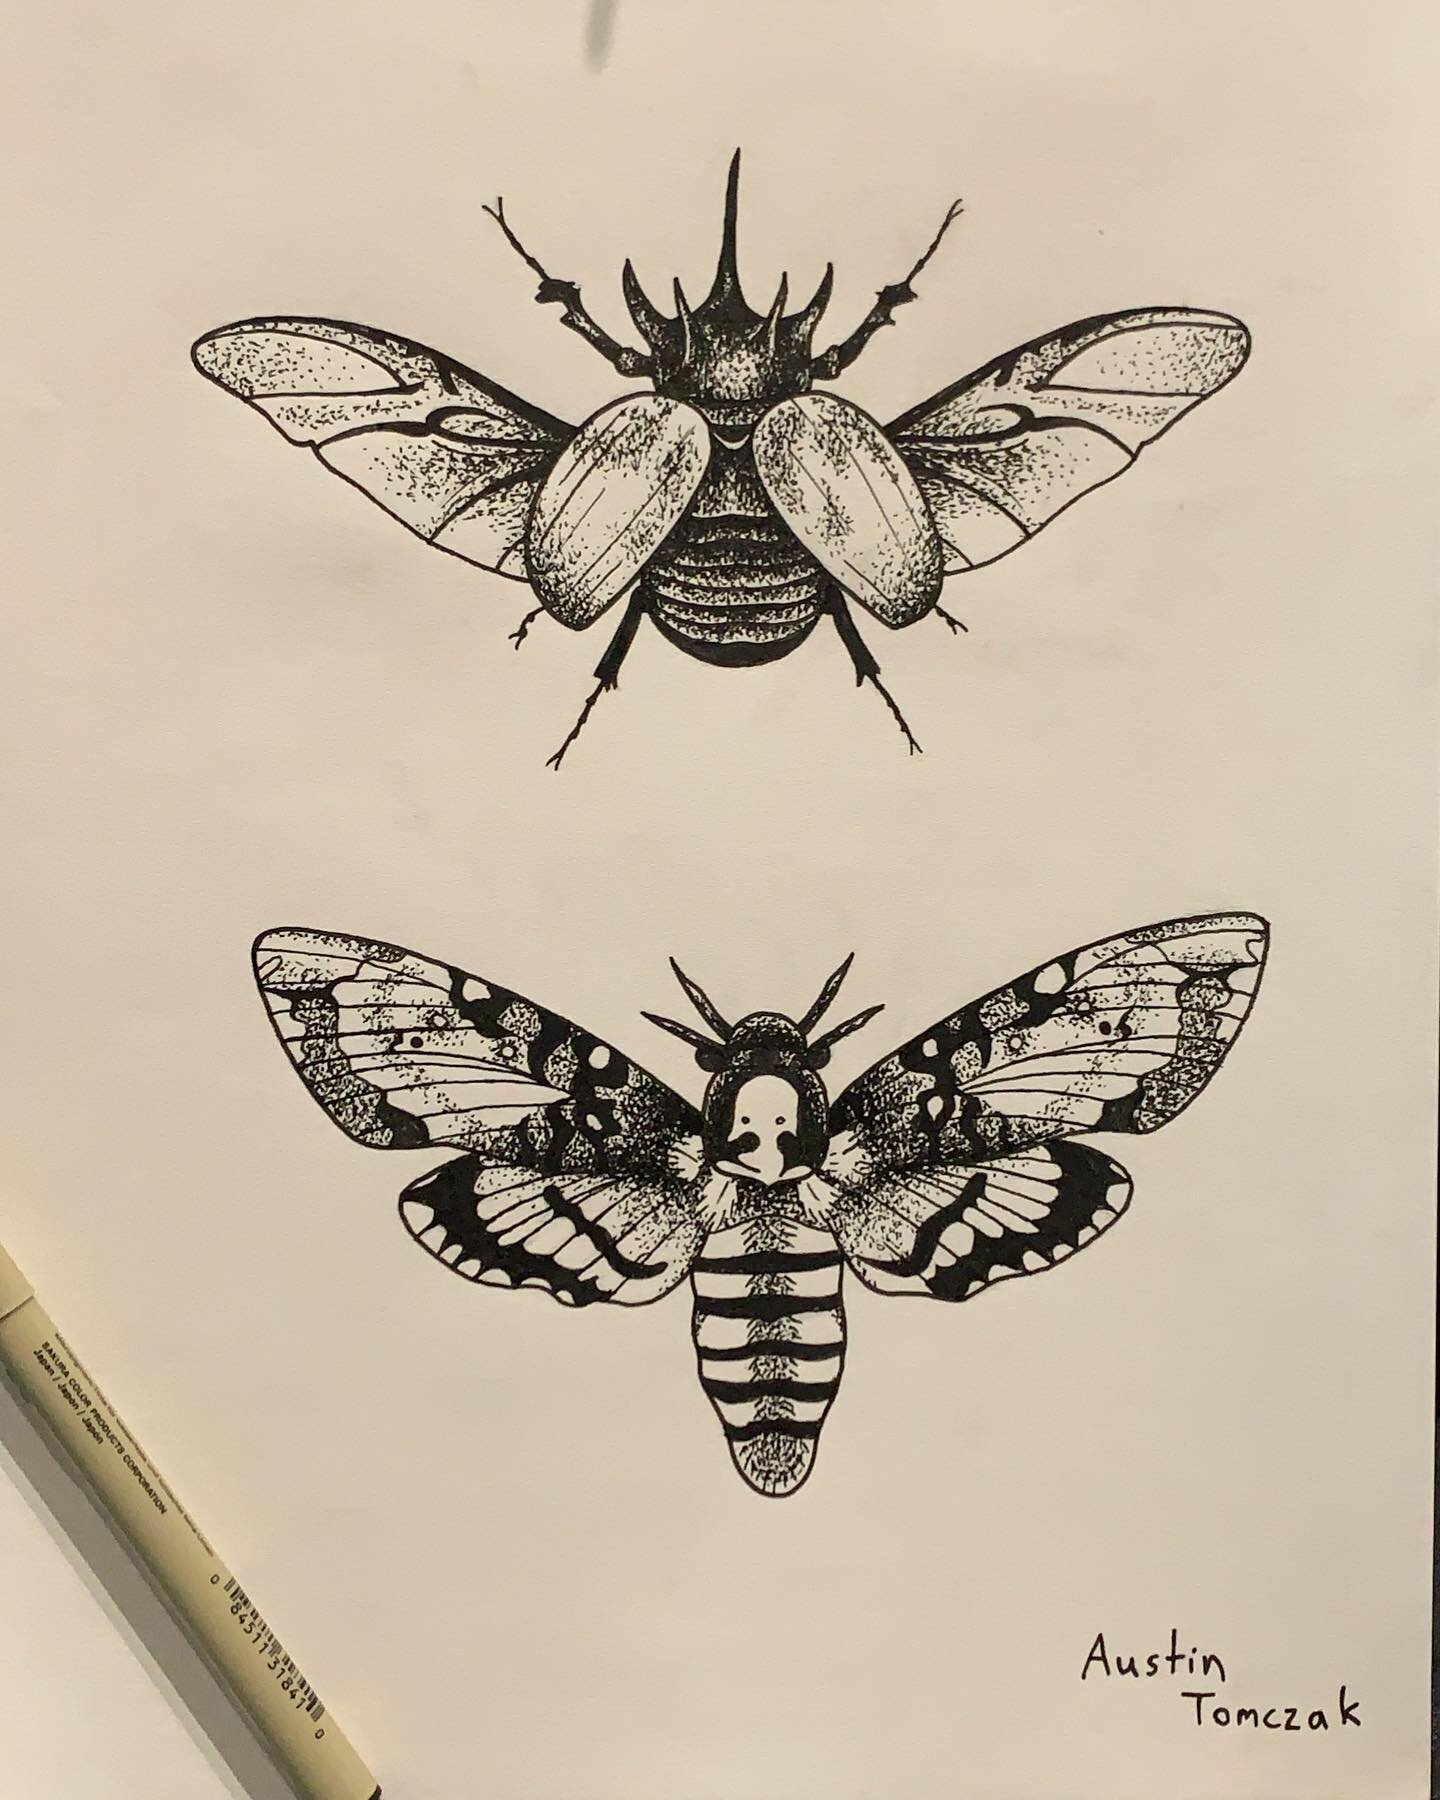 Some more hand-drawn designs available to be tattooed!!!

#duluthmn #mntattooers #bugtattoo #insecttattoo #tattooflash #tattooartist